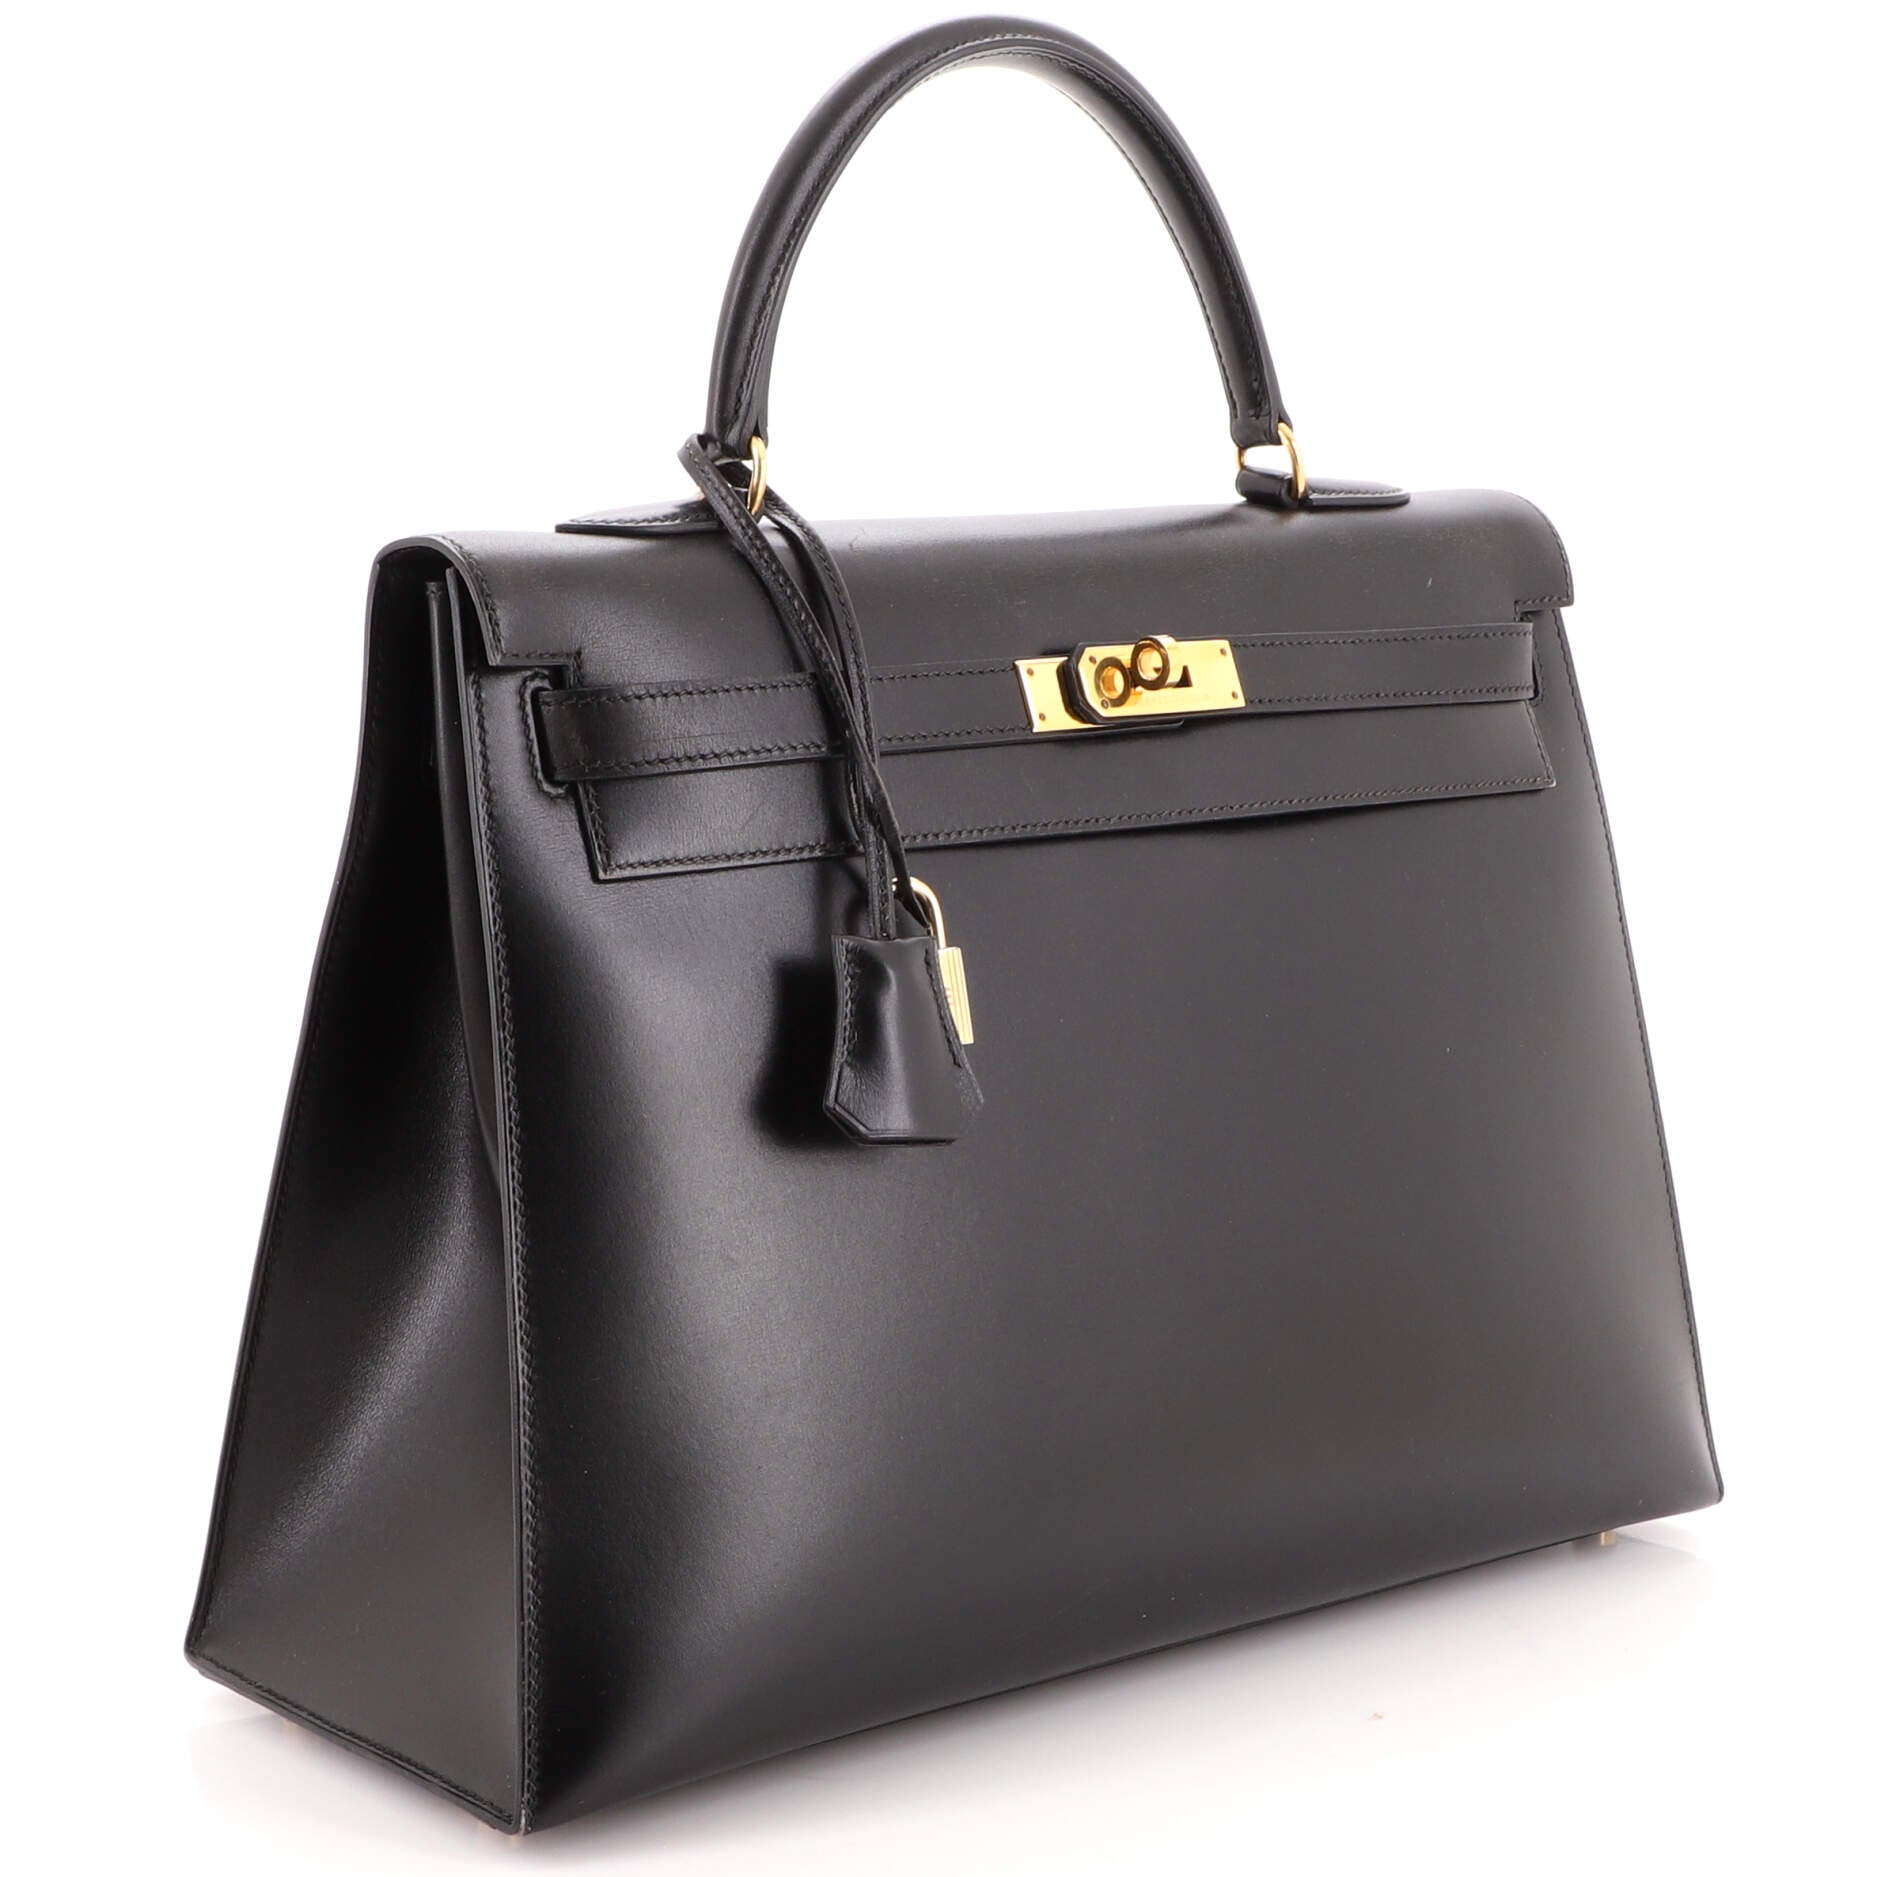 Hermes Kelly Sellier Box Calf 32 Noir in Box Calf Leather with